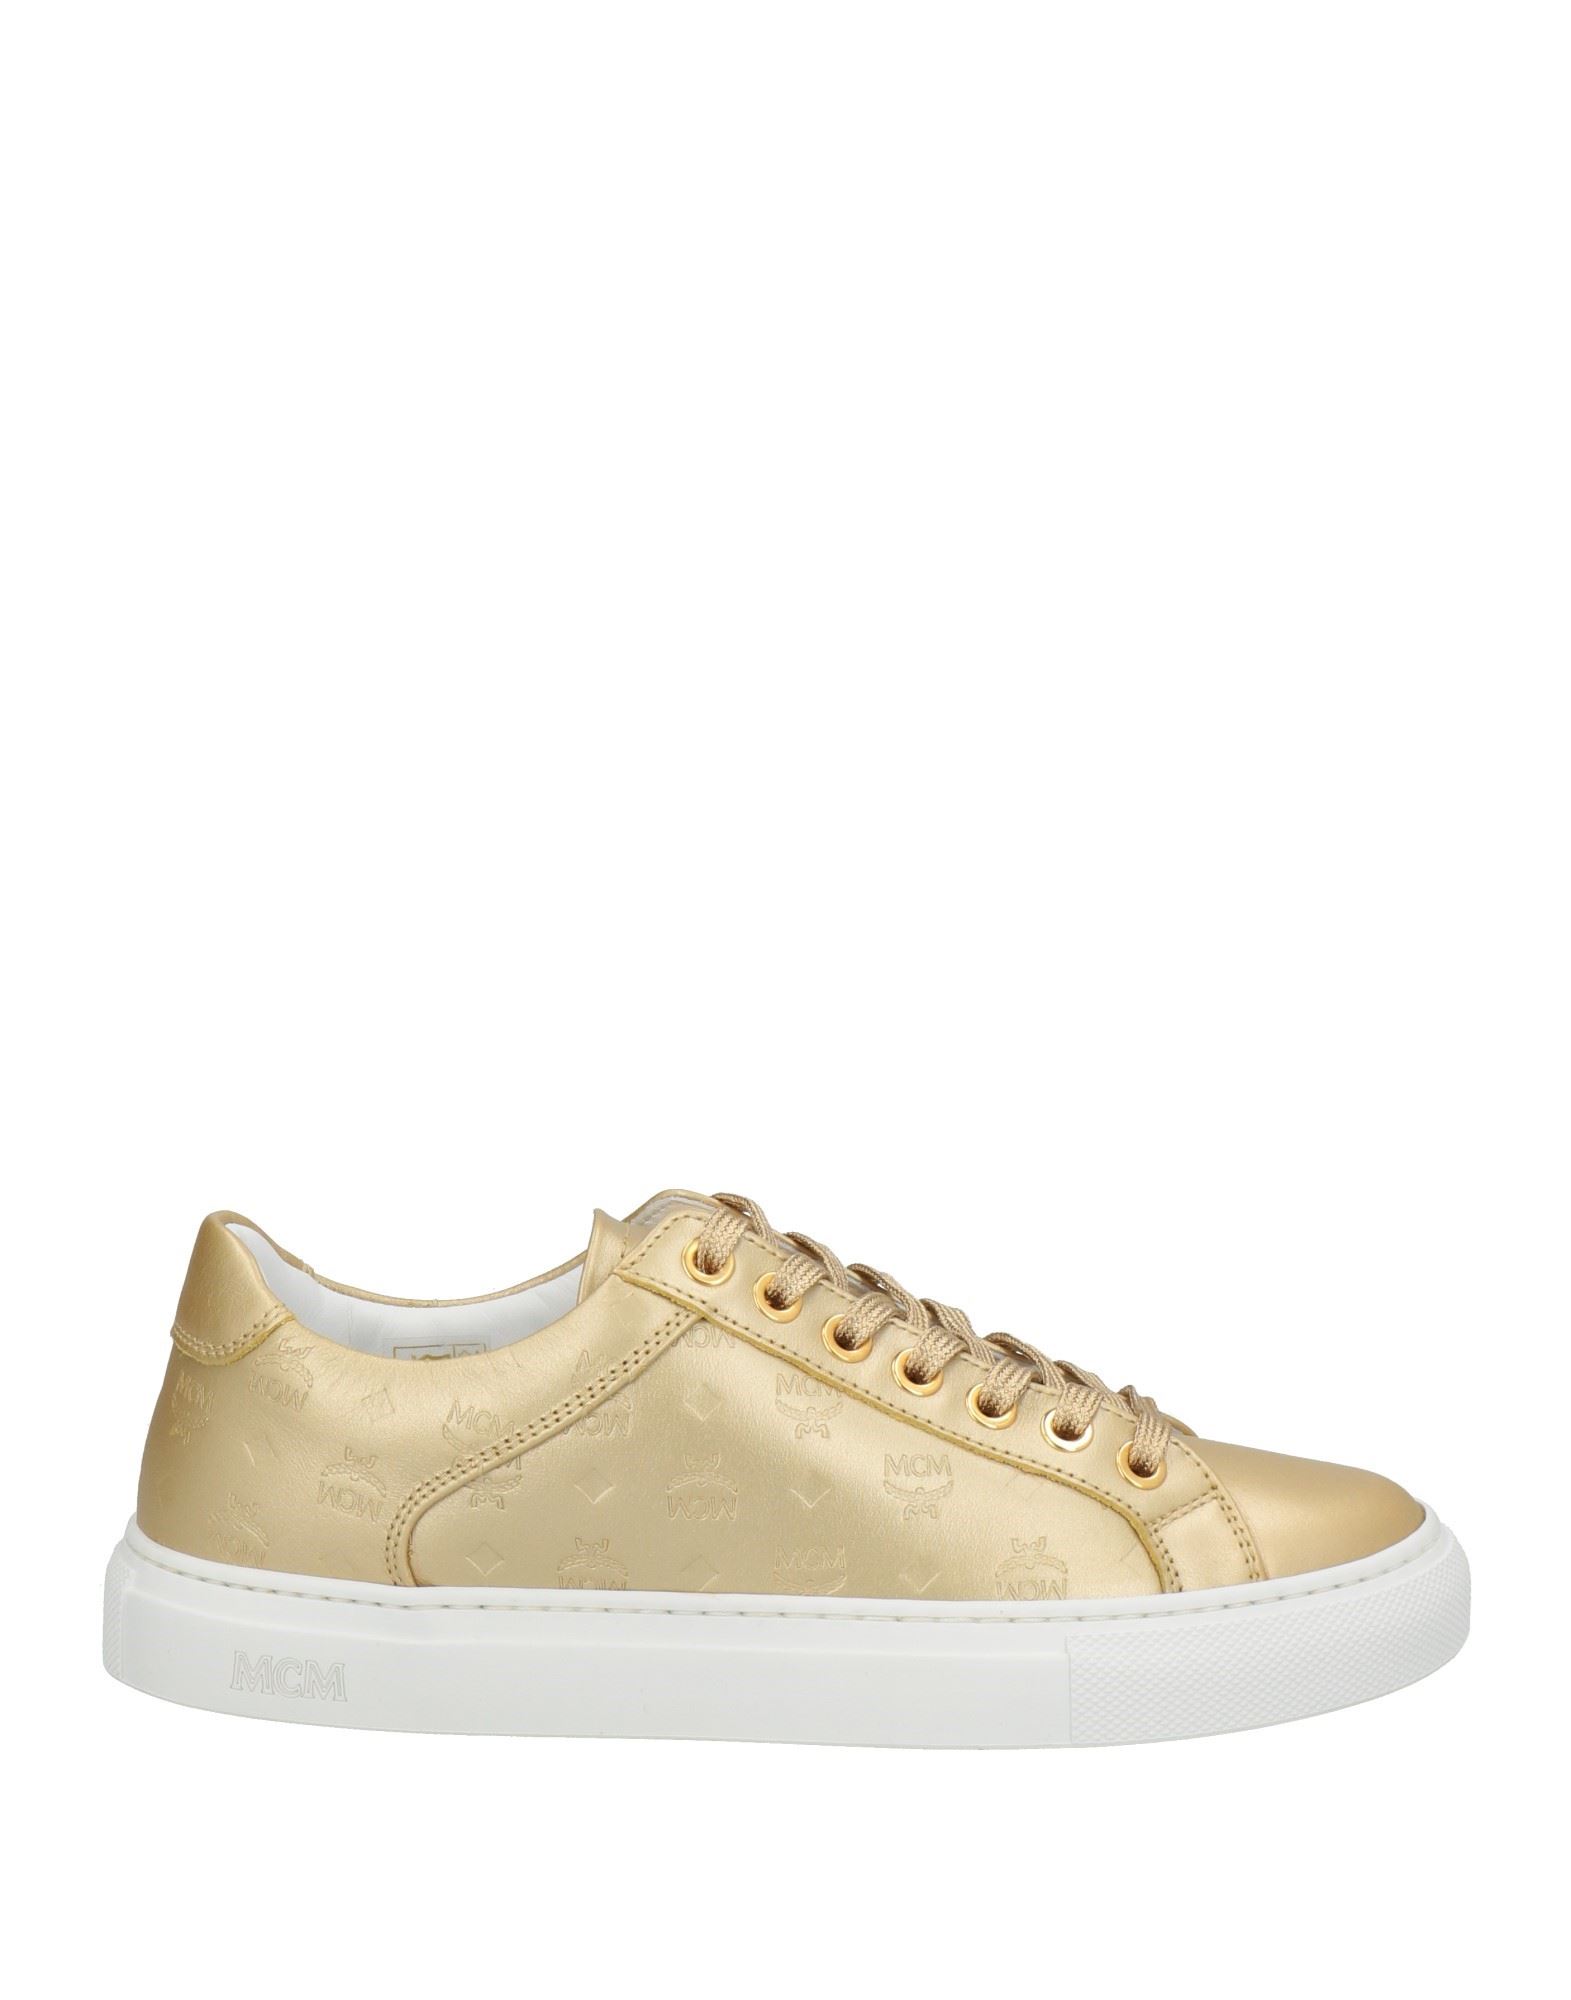 Mcm Sneakers In Gold | ModeSens